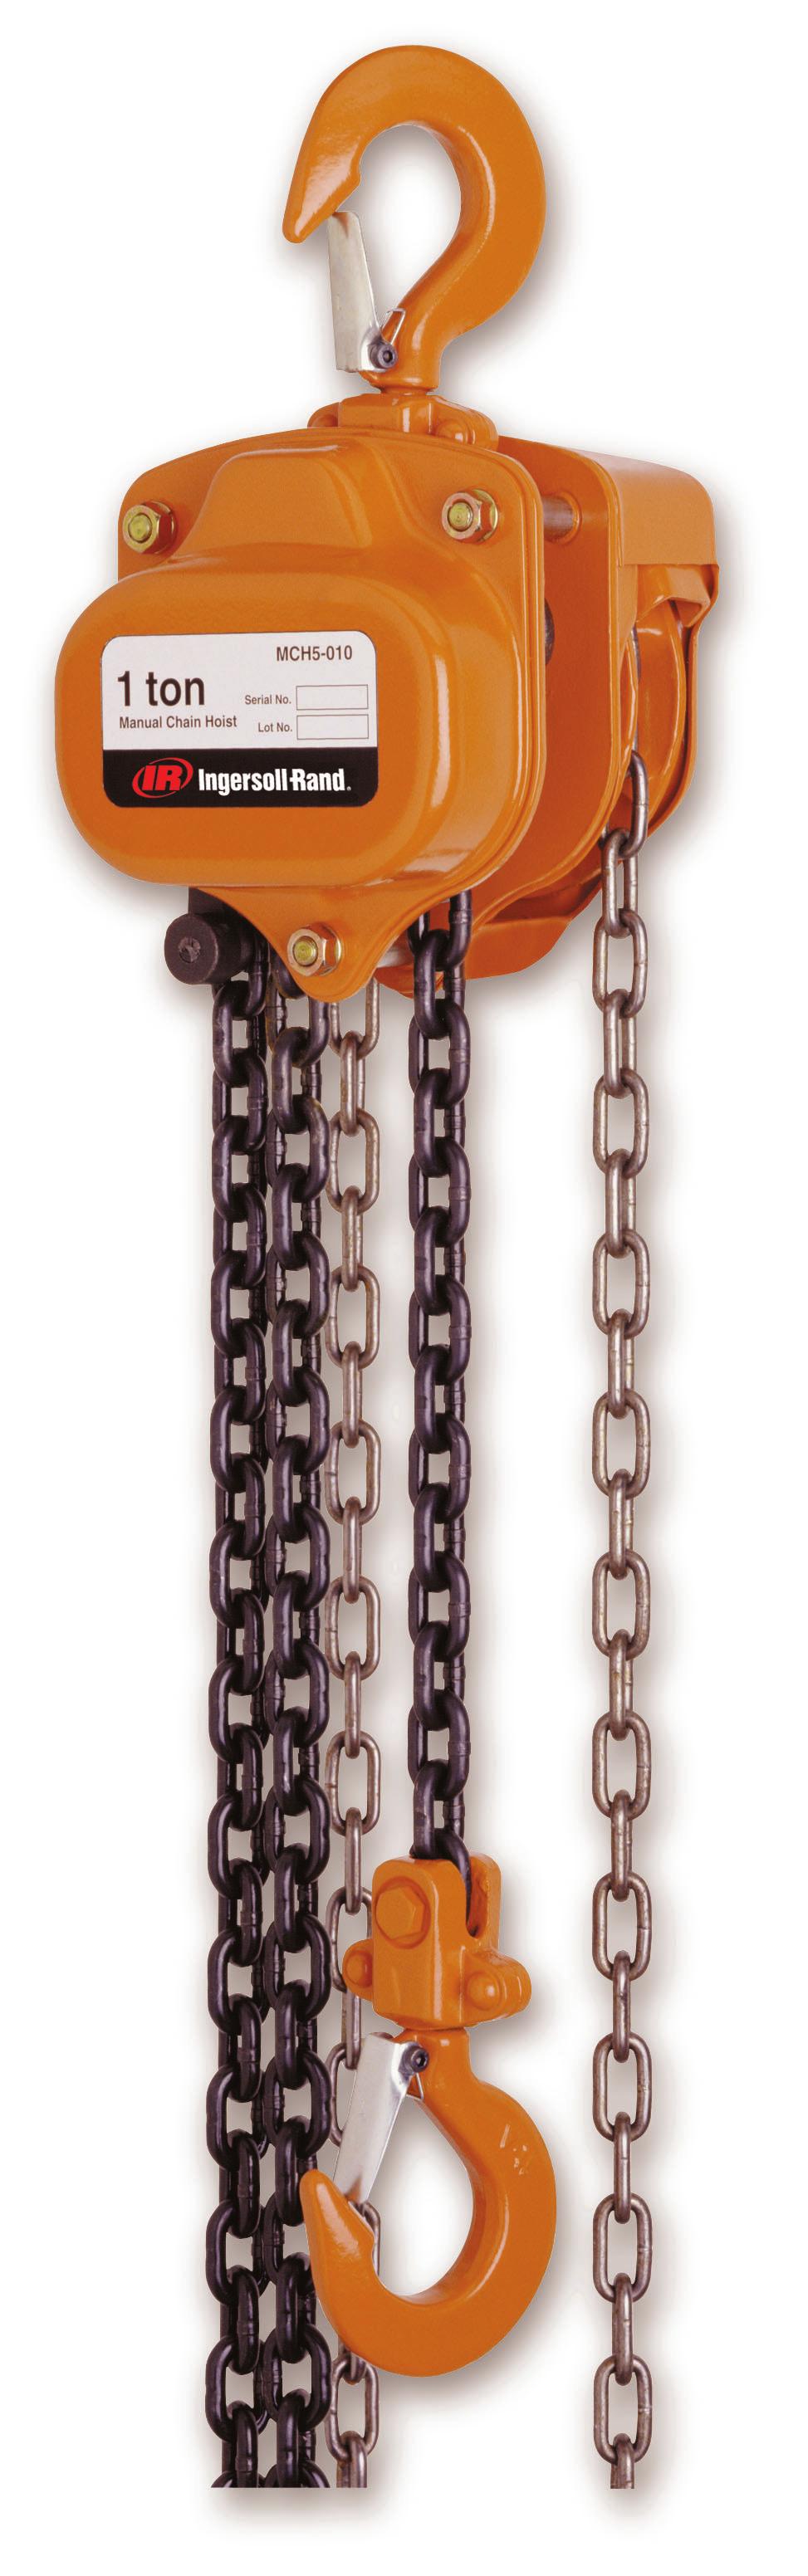 MCH5 Classic Series Manual Chain Hoist 1/2 5 metric ton Lifting Capacity ownscaled version of the VL2 for applications with lower duty cycles. Ideal for maintenance use application.